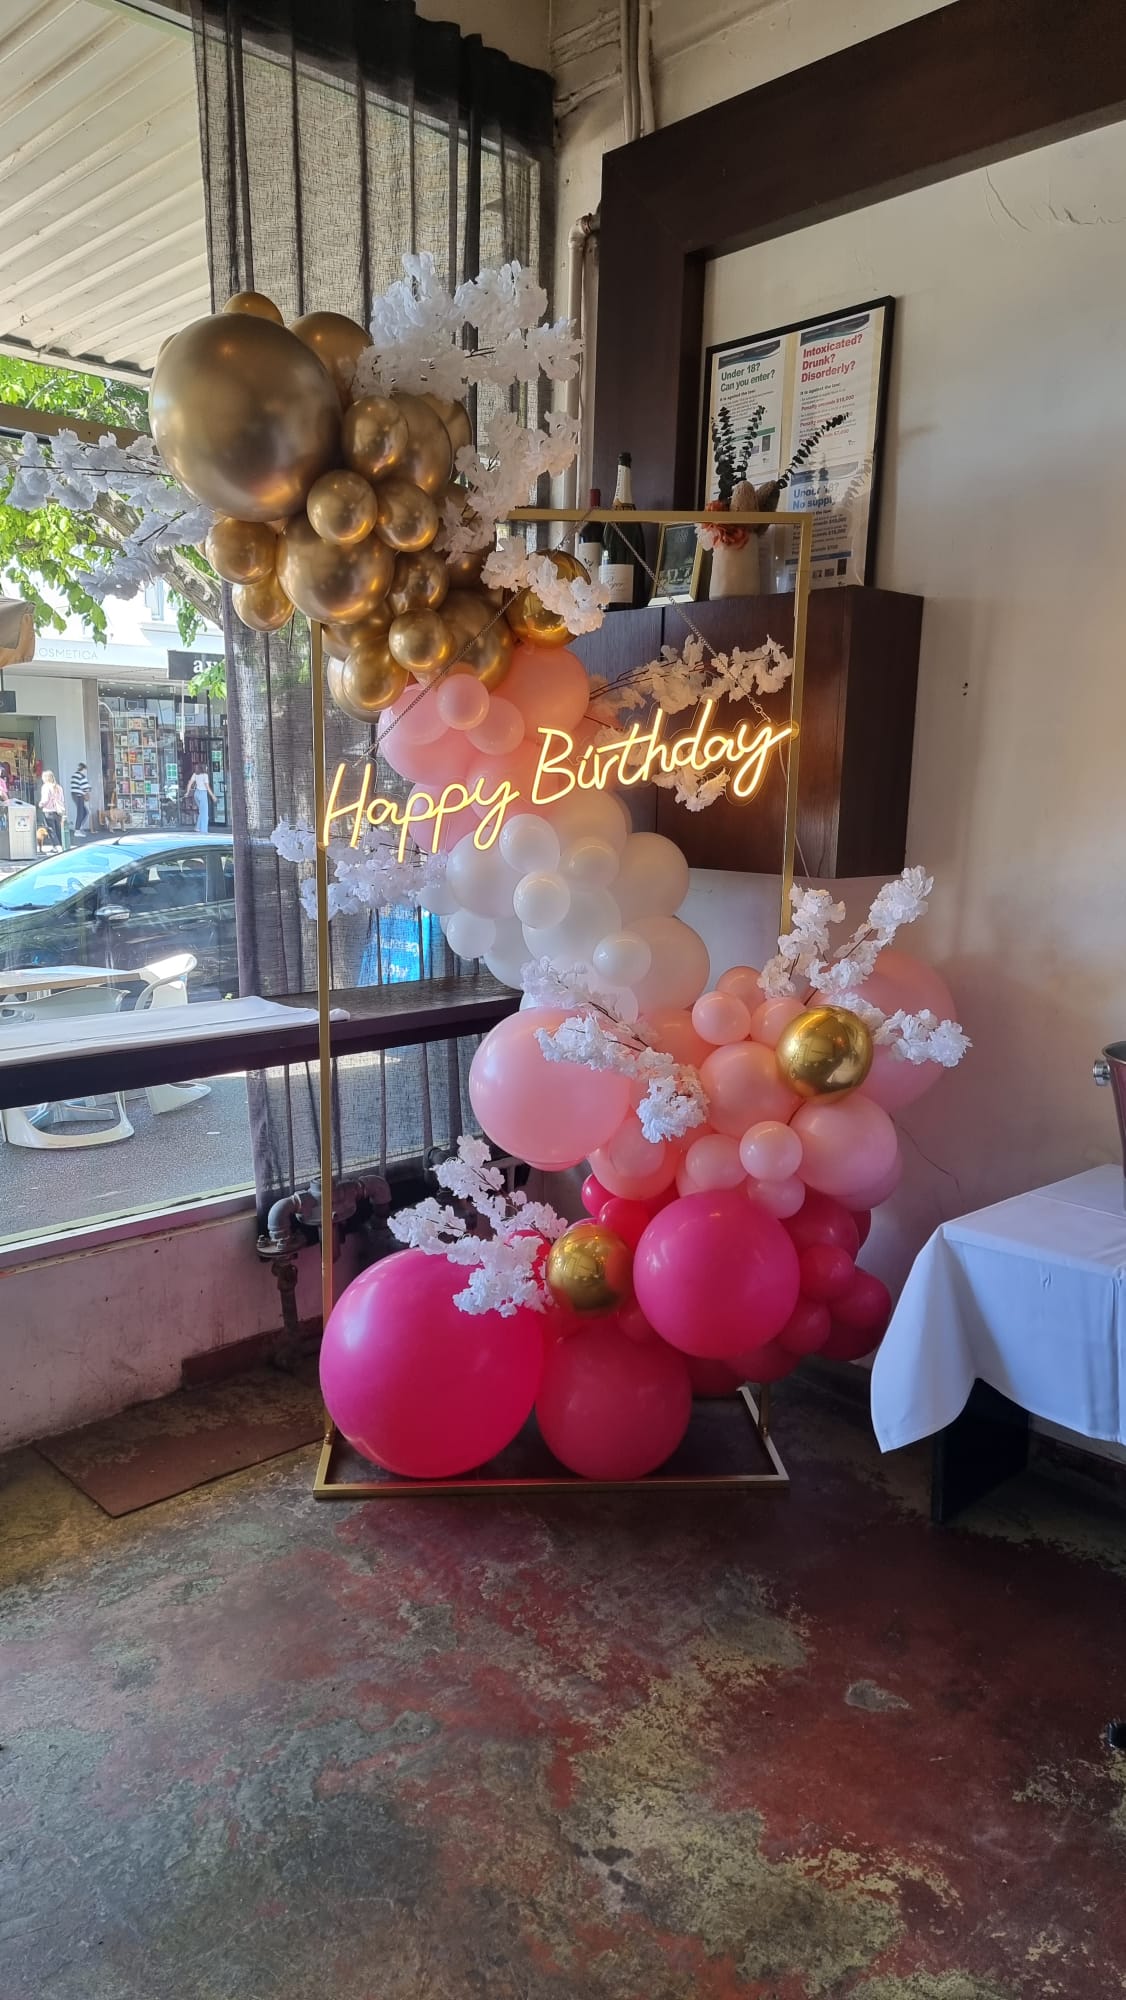 Pink Garland with White Faux Flowers and a "Happy Birthday" Neon